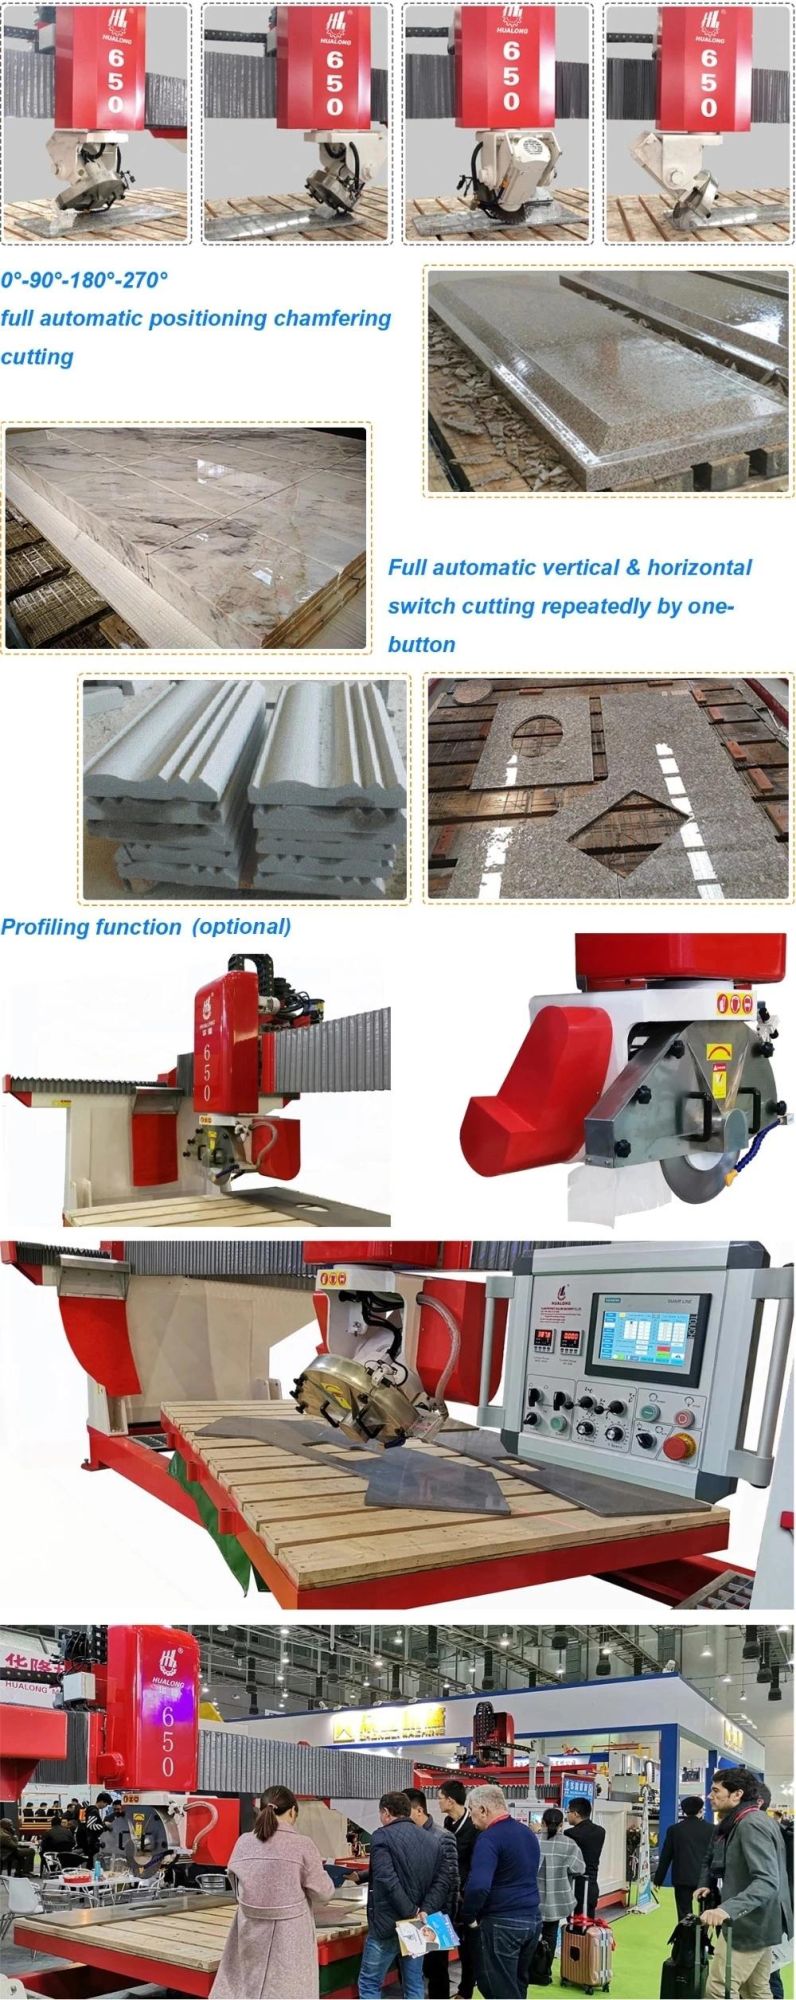 Hualong Saw Machine Hlsq-650 Paving Marble Slabs Cut Granite Tiles Machinery Stone Wall Wet Cutting Machine for Sale with 360 Degree Workbench Rotation